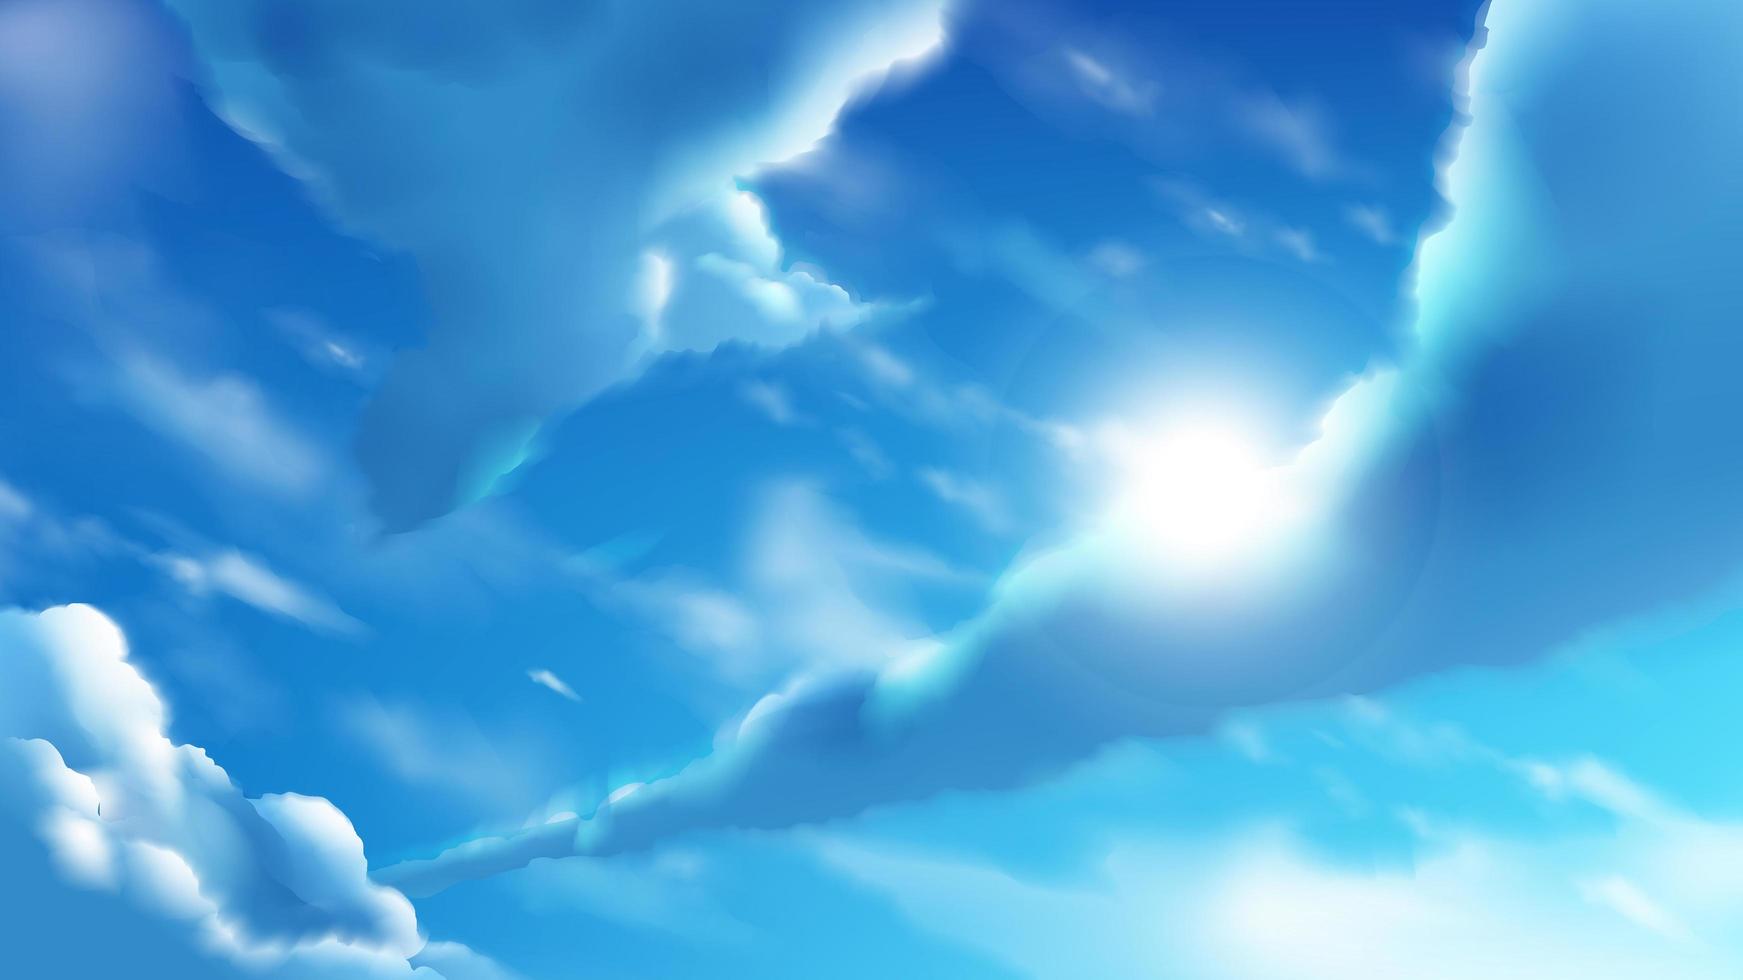 Anime clouds on the bright blue sky vector